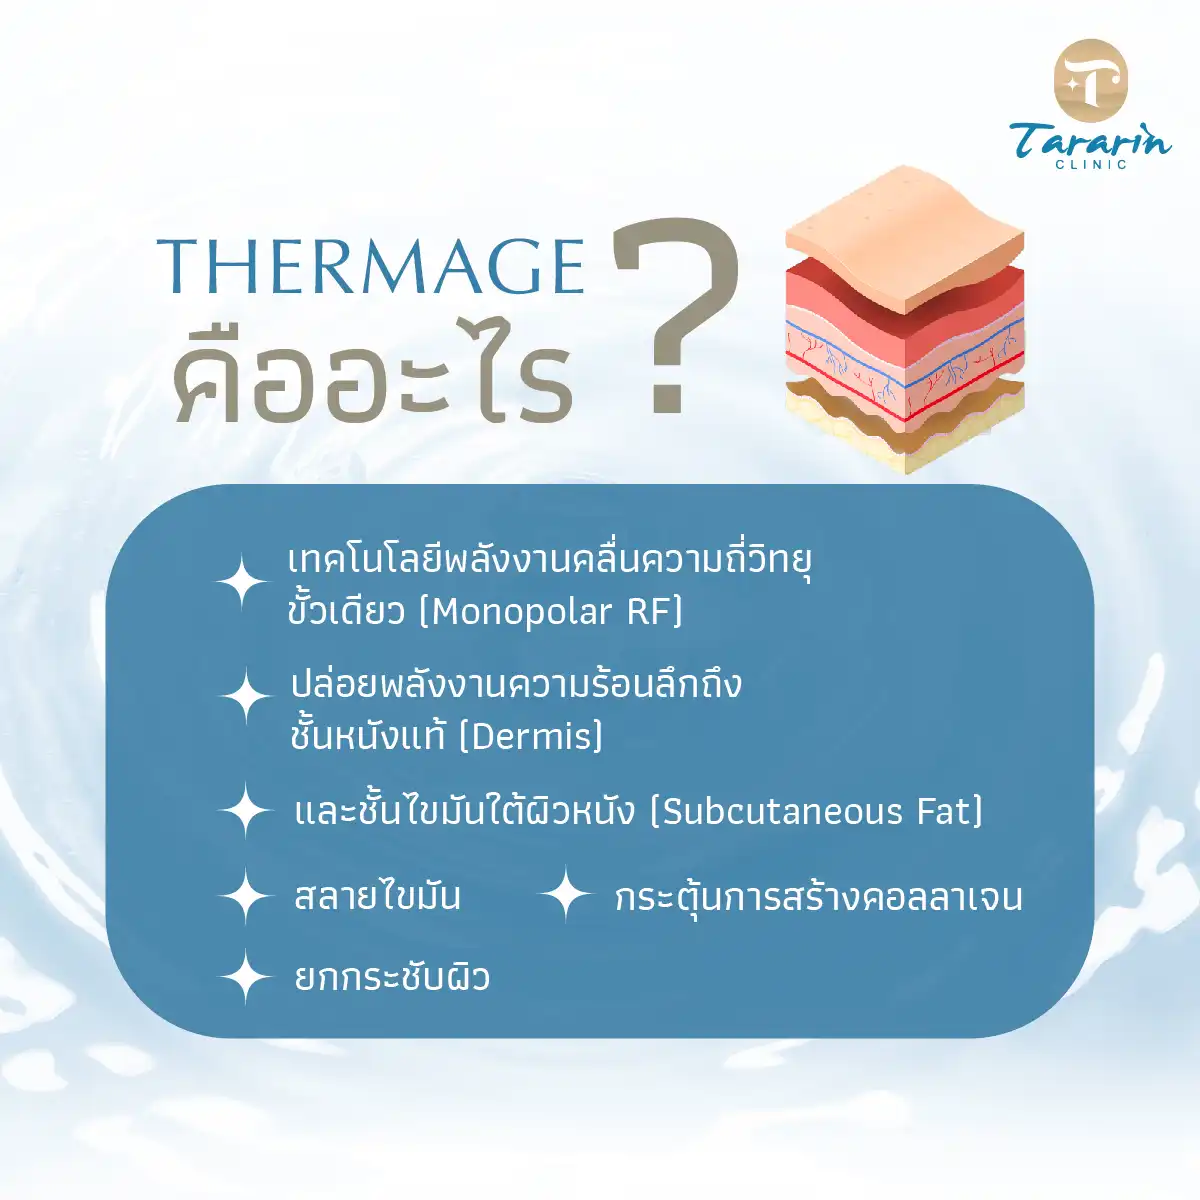 Thermage คืออะไร